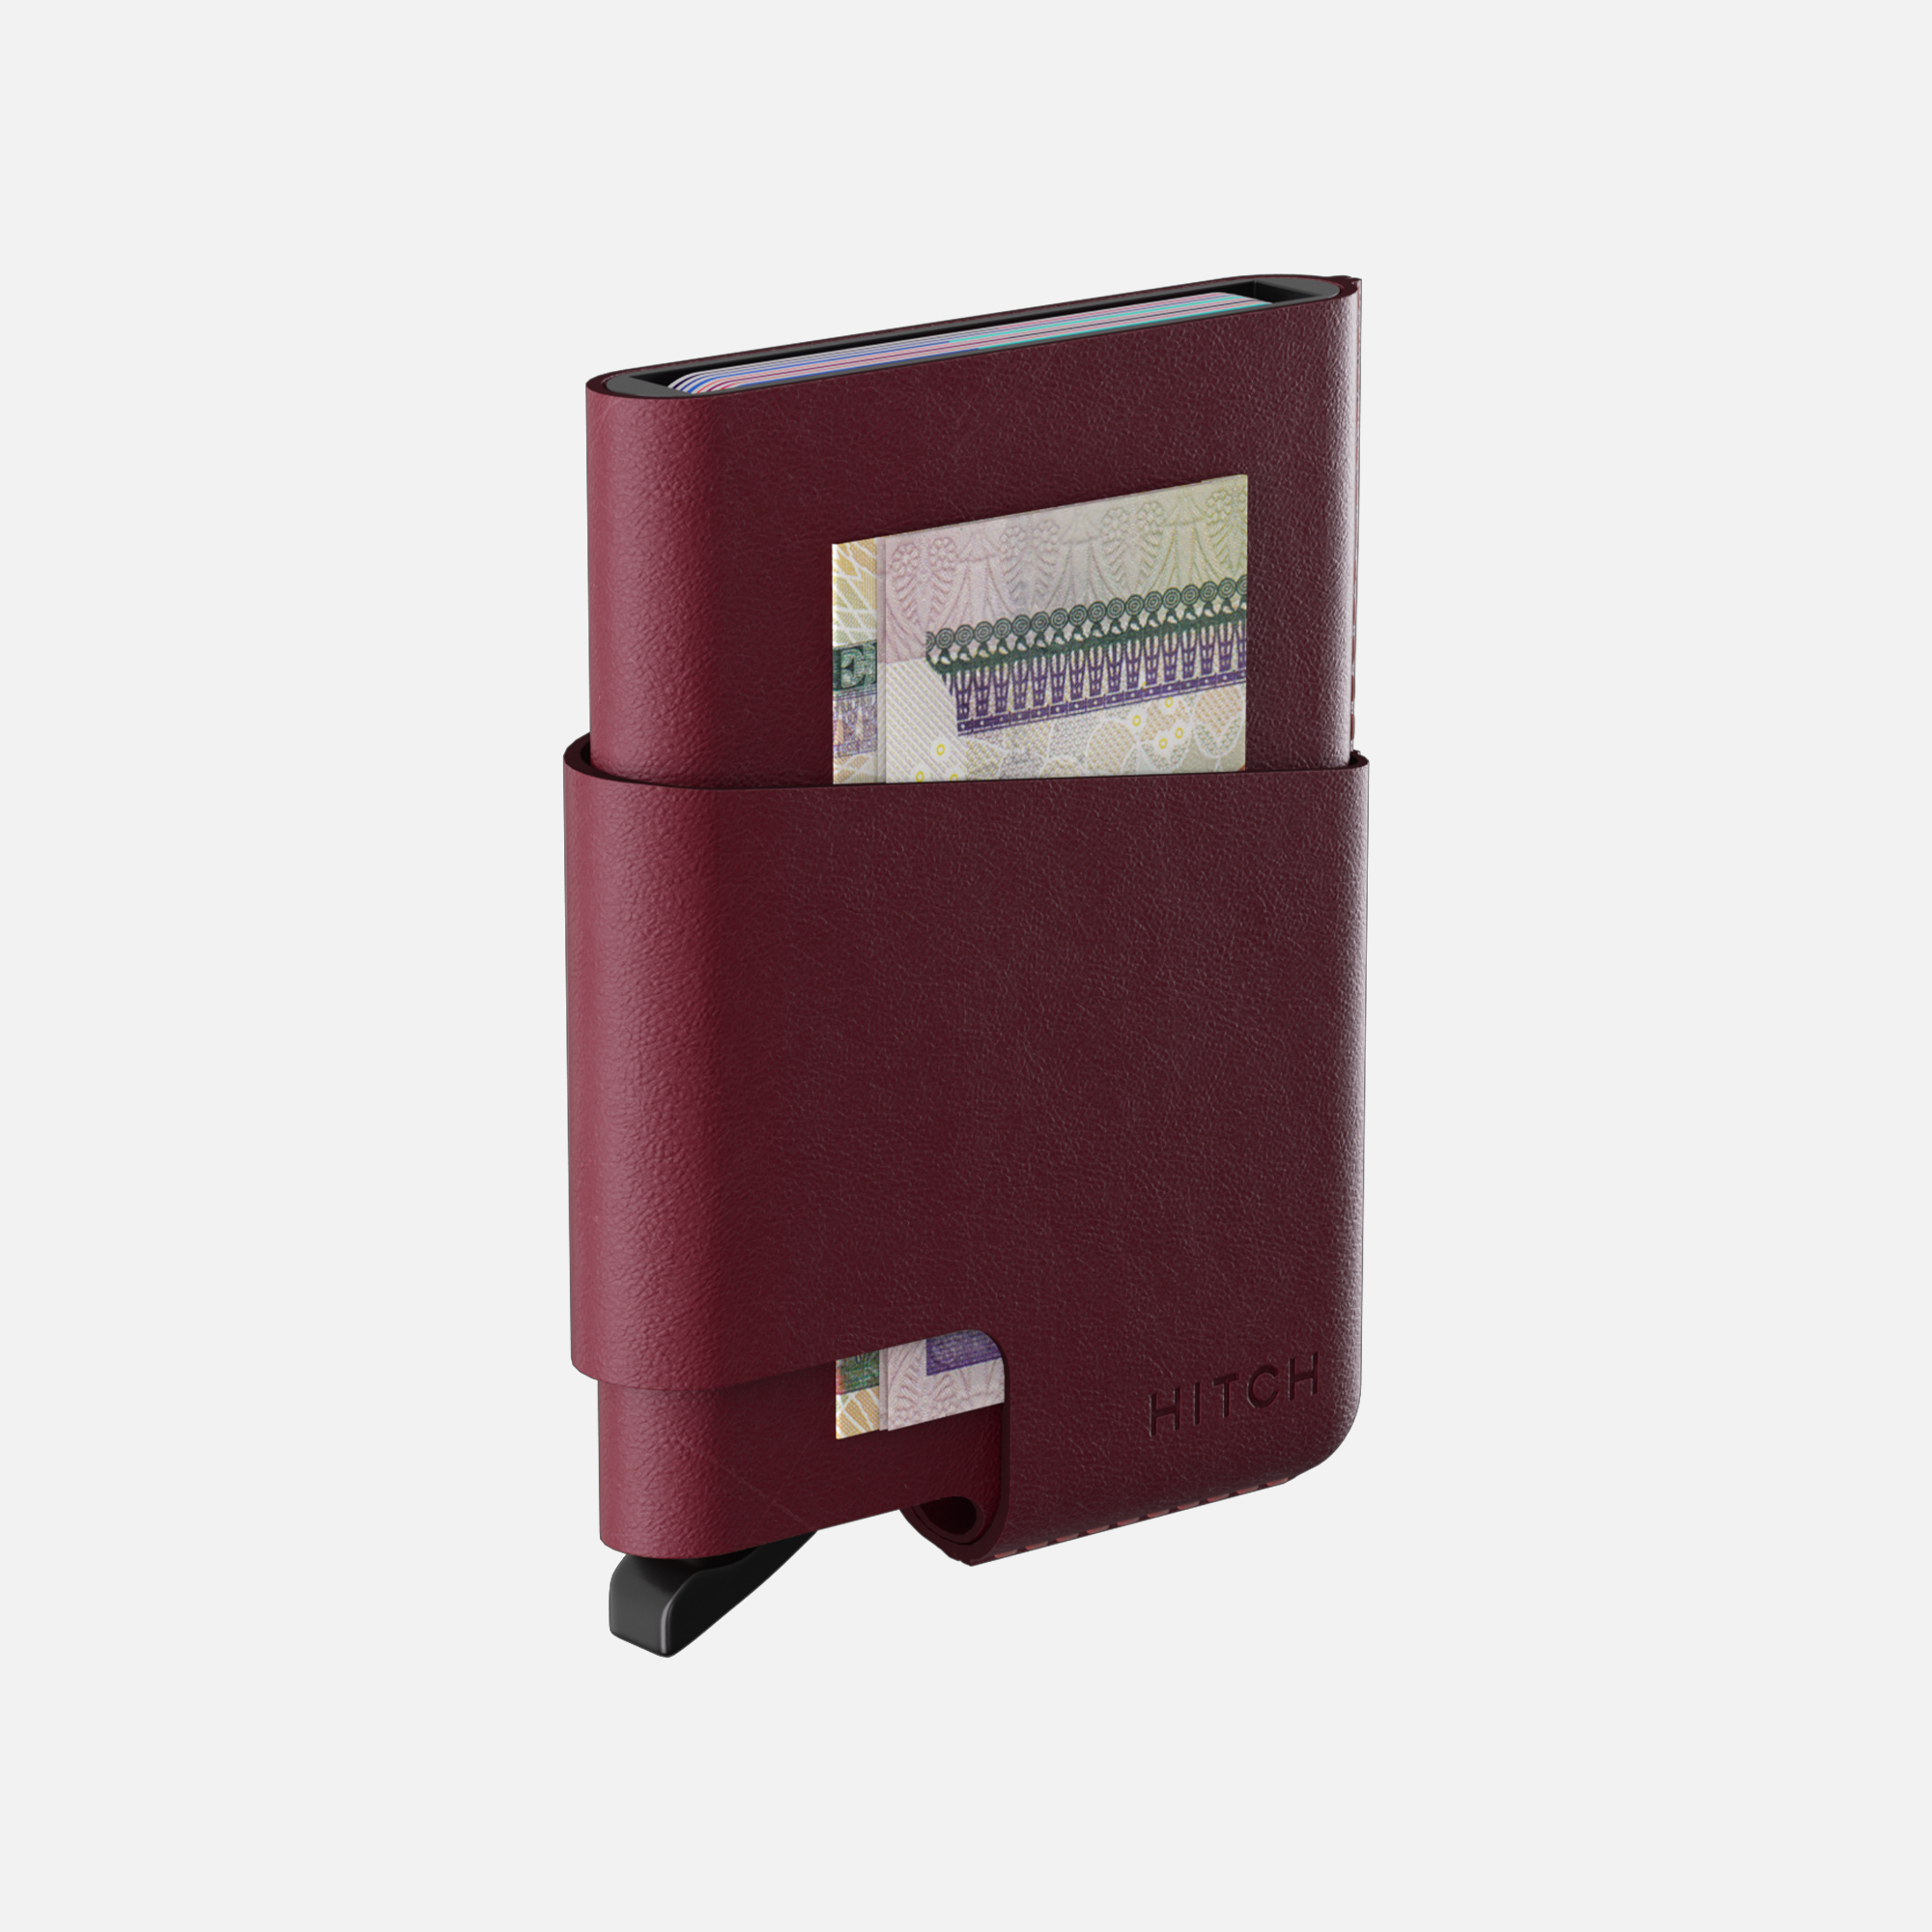 Burgundy leather cardholder wallet with bill compartment, embossed "HITCH" brand logo, isolated on white background.